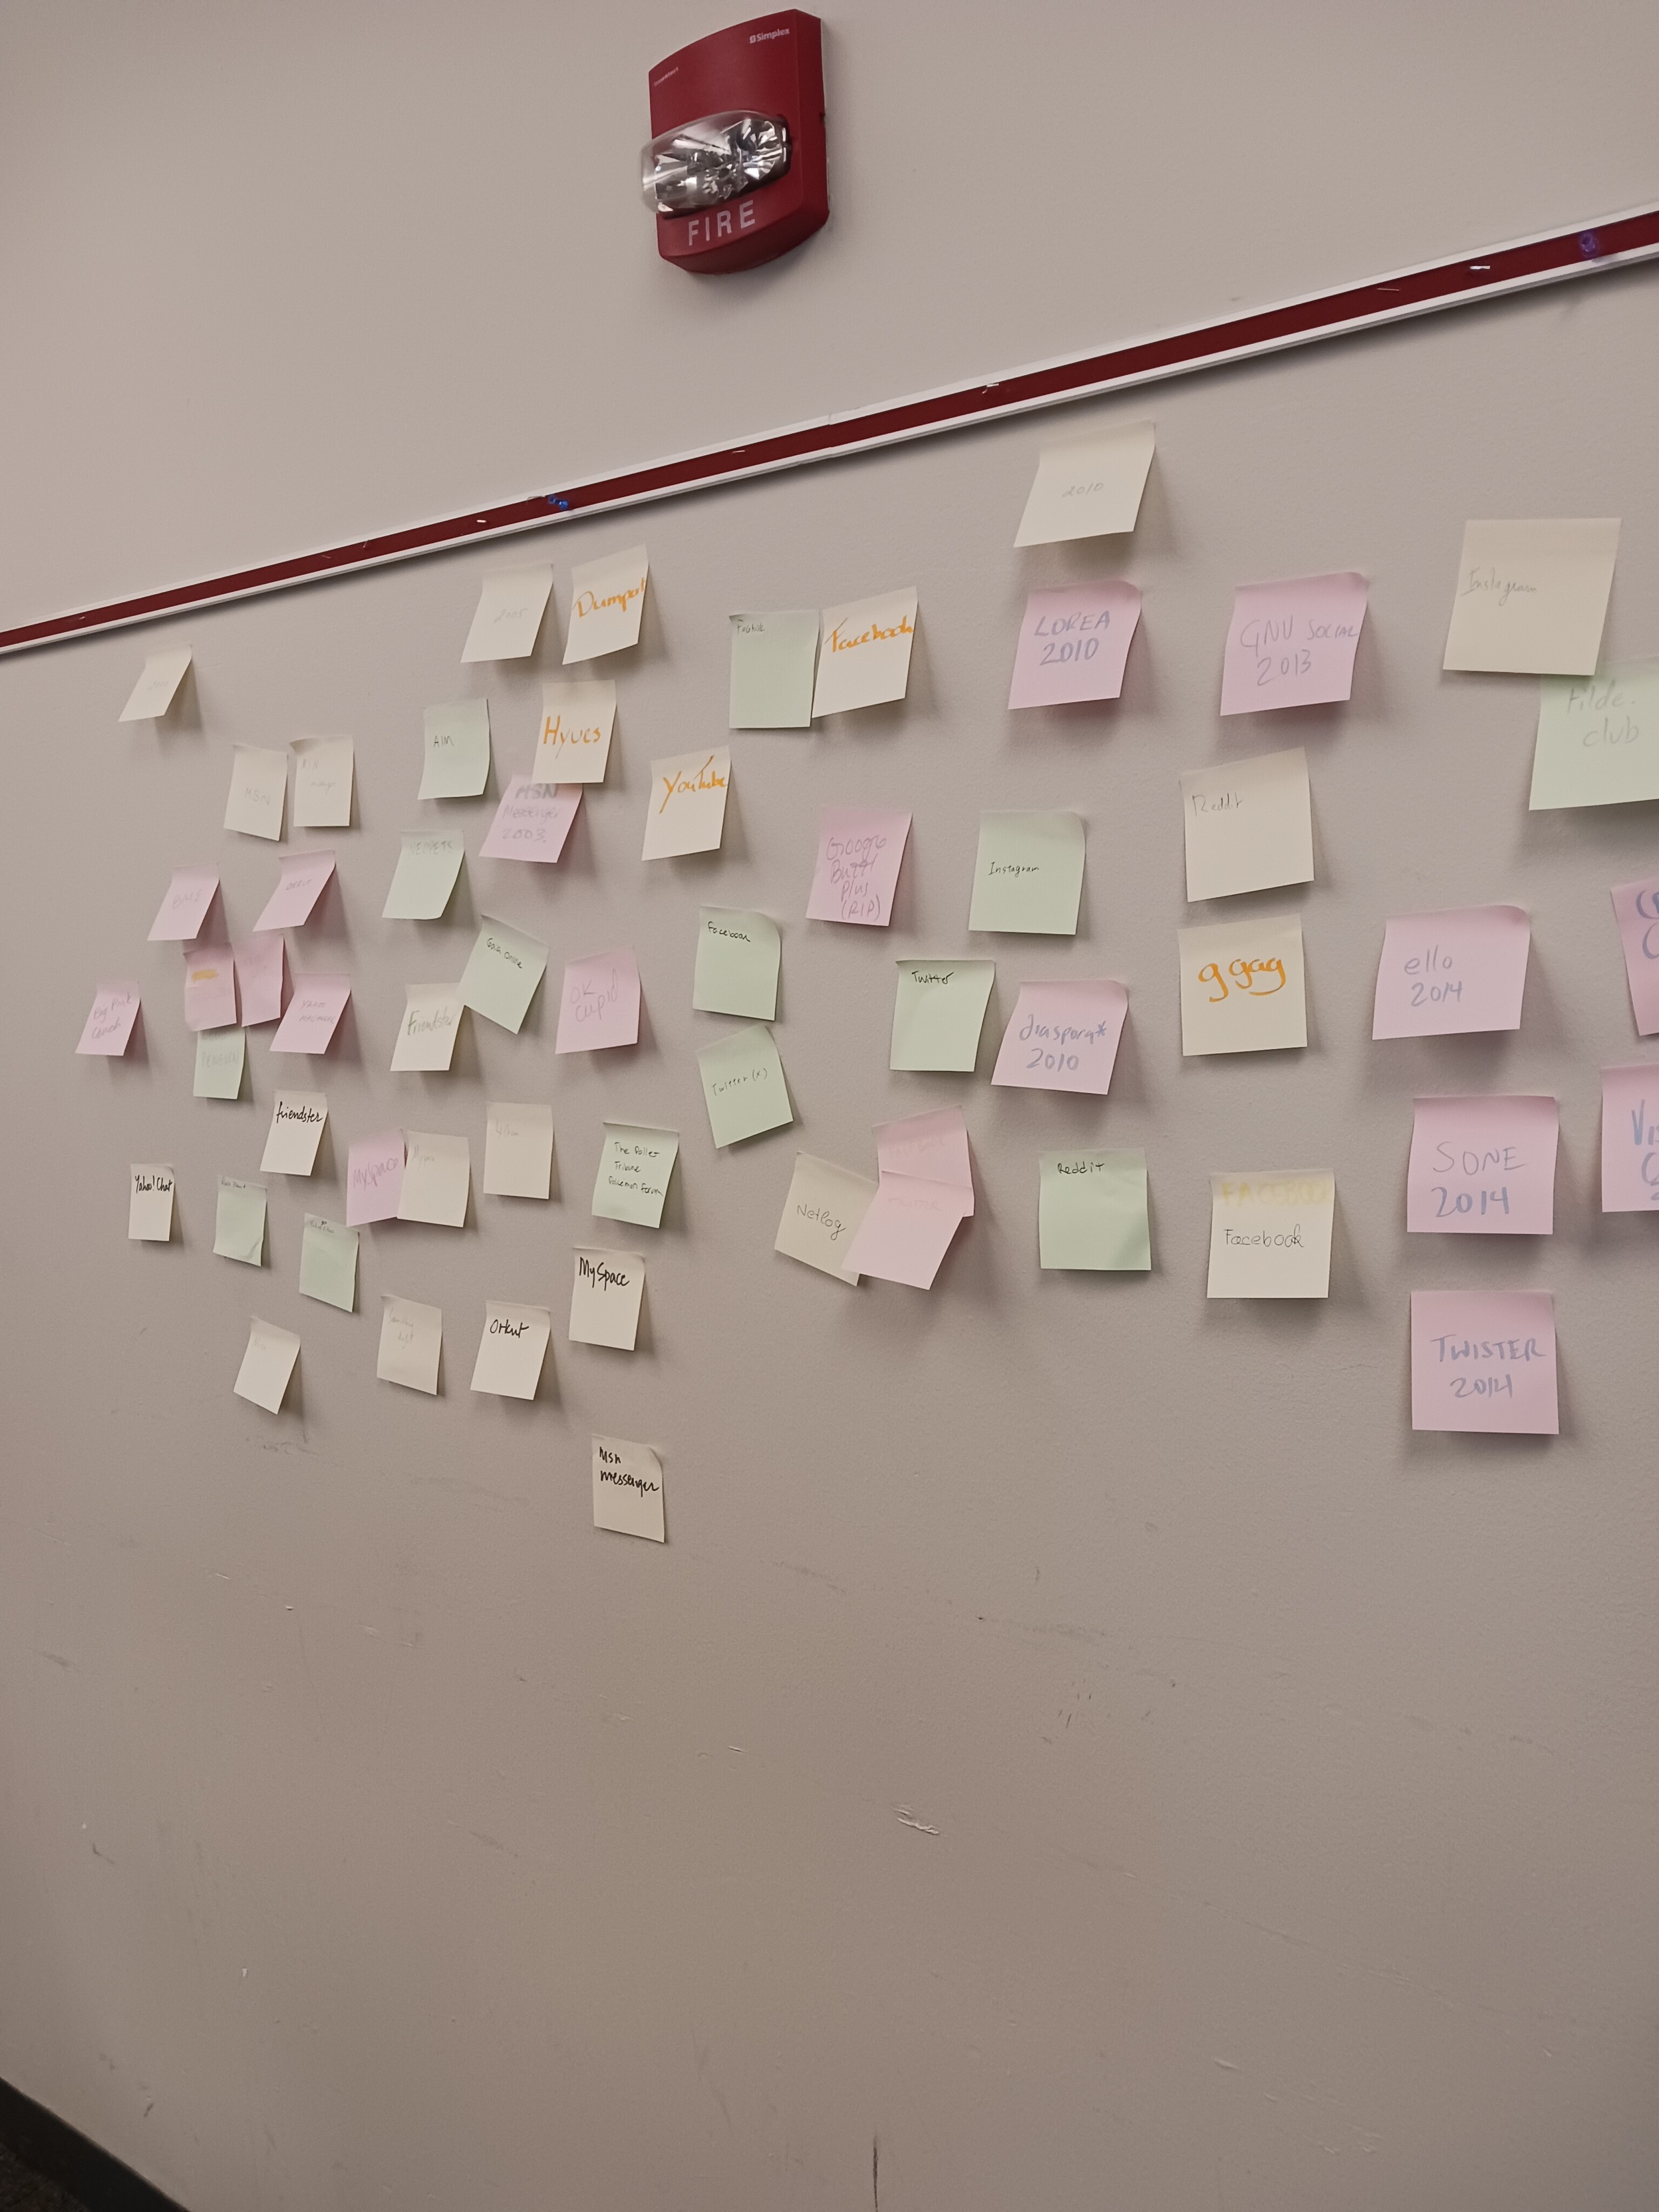 A wall of post-it notes that creates a timeline of social media, starting with email in the 1970s through the fediverse today